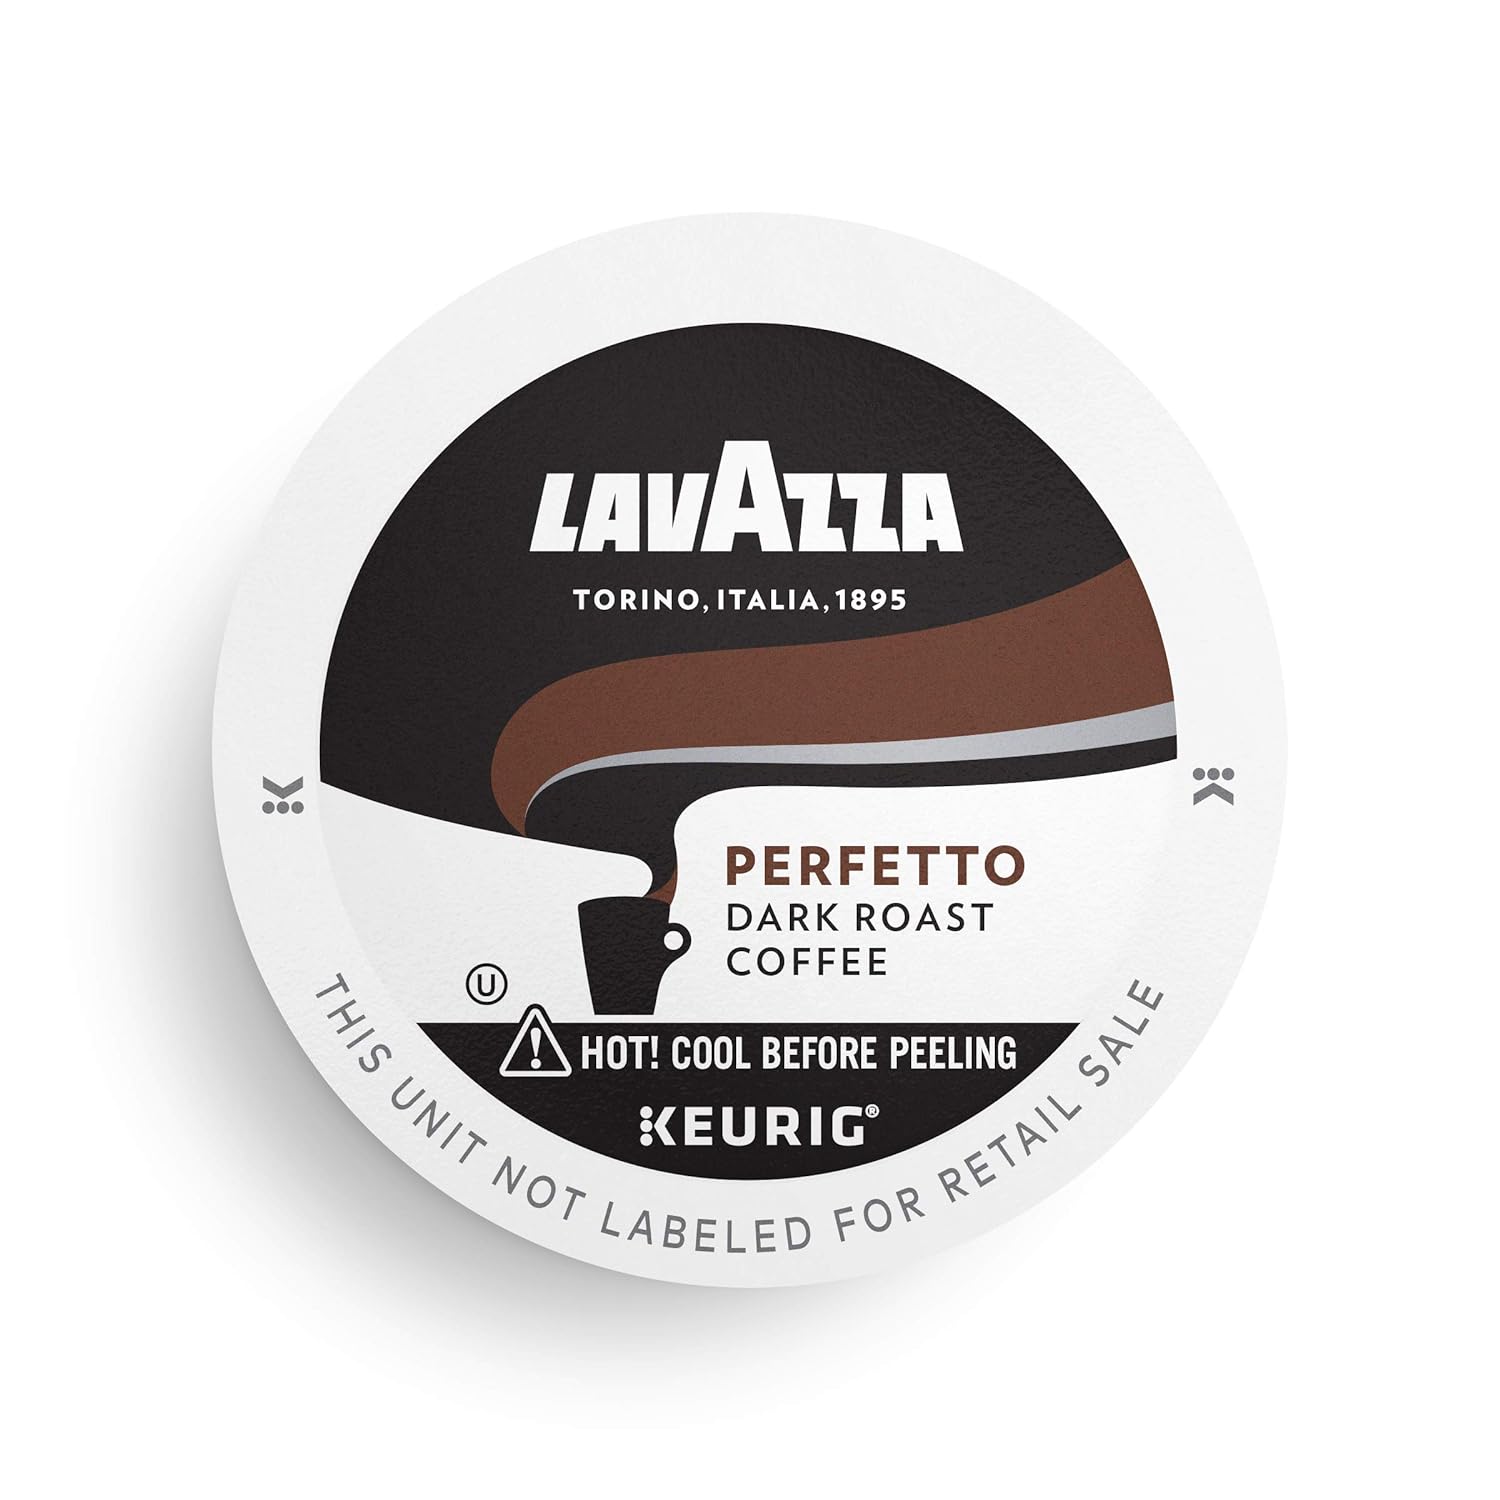 Lavazza Perfetto Single-Serve Coffee K-Cup® Pods for Keurig® Brewer, 16 Count, Full-bodied dark roast with bold, dark flavor and notes of caramel, 100% Arabica